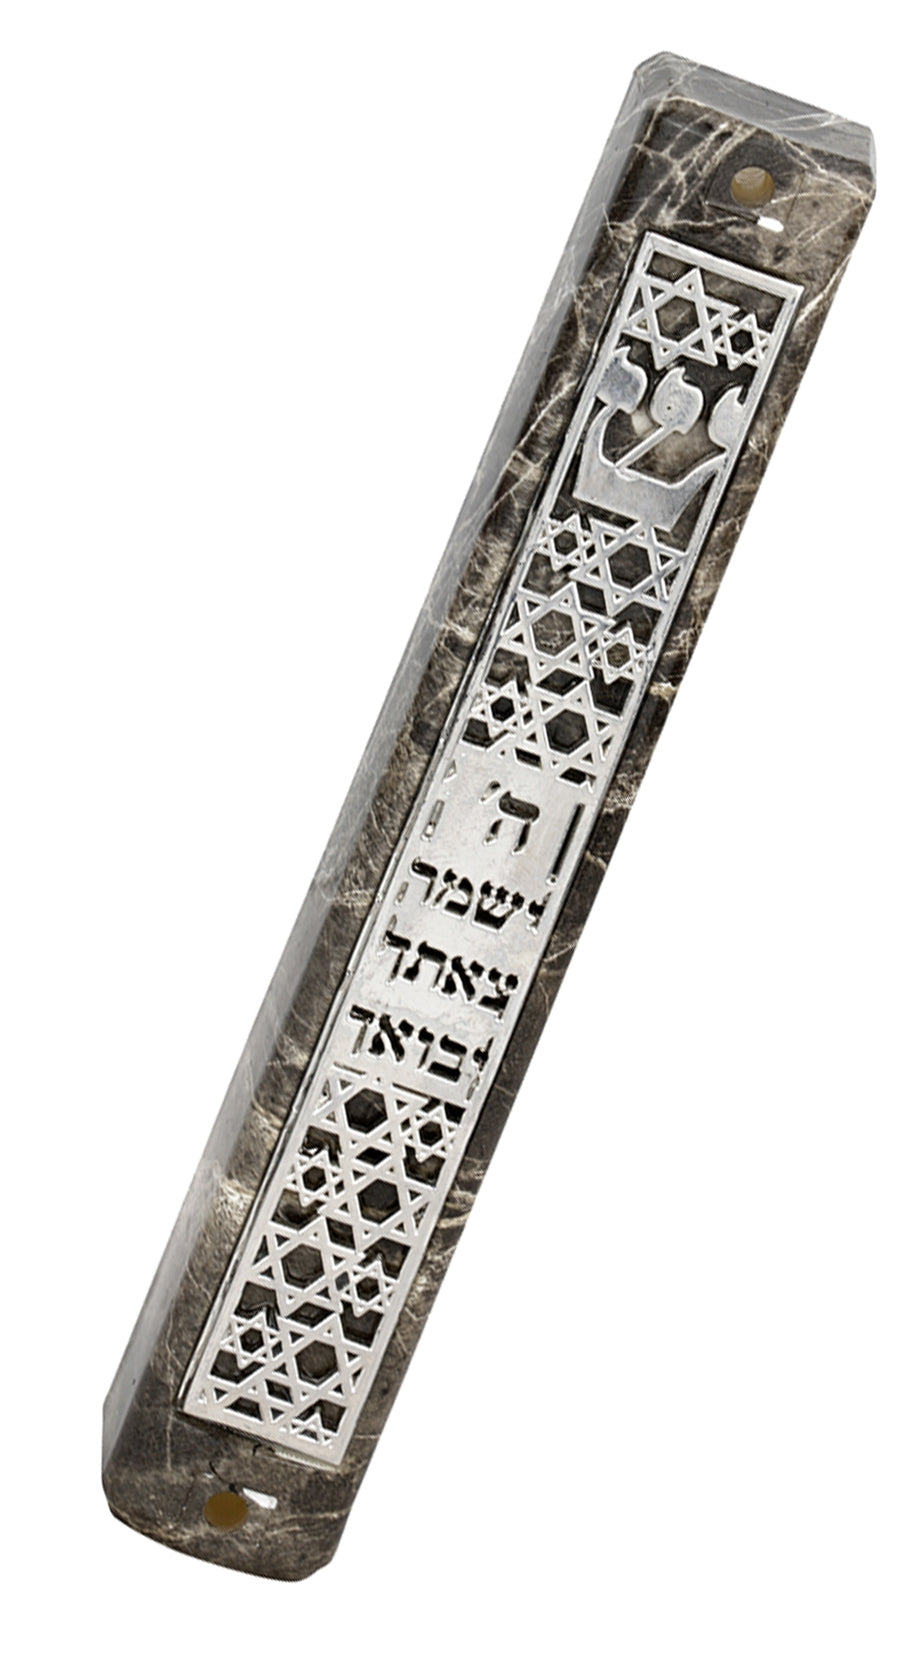 Marble Mezuzah Case with Star Design and Text on Plate